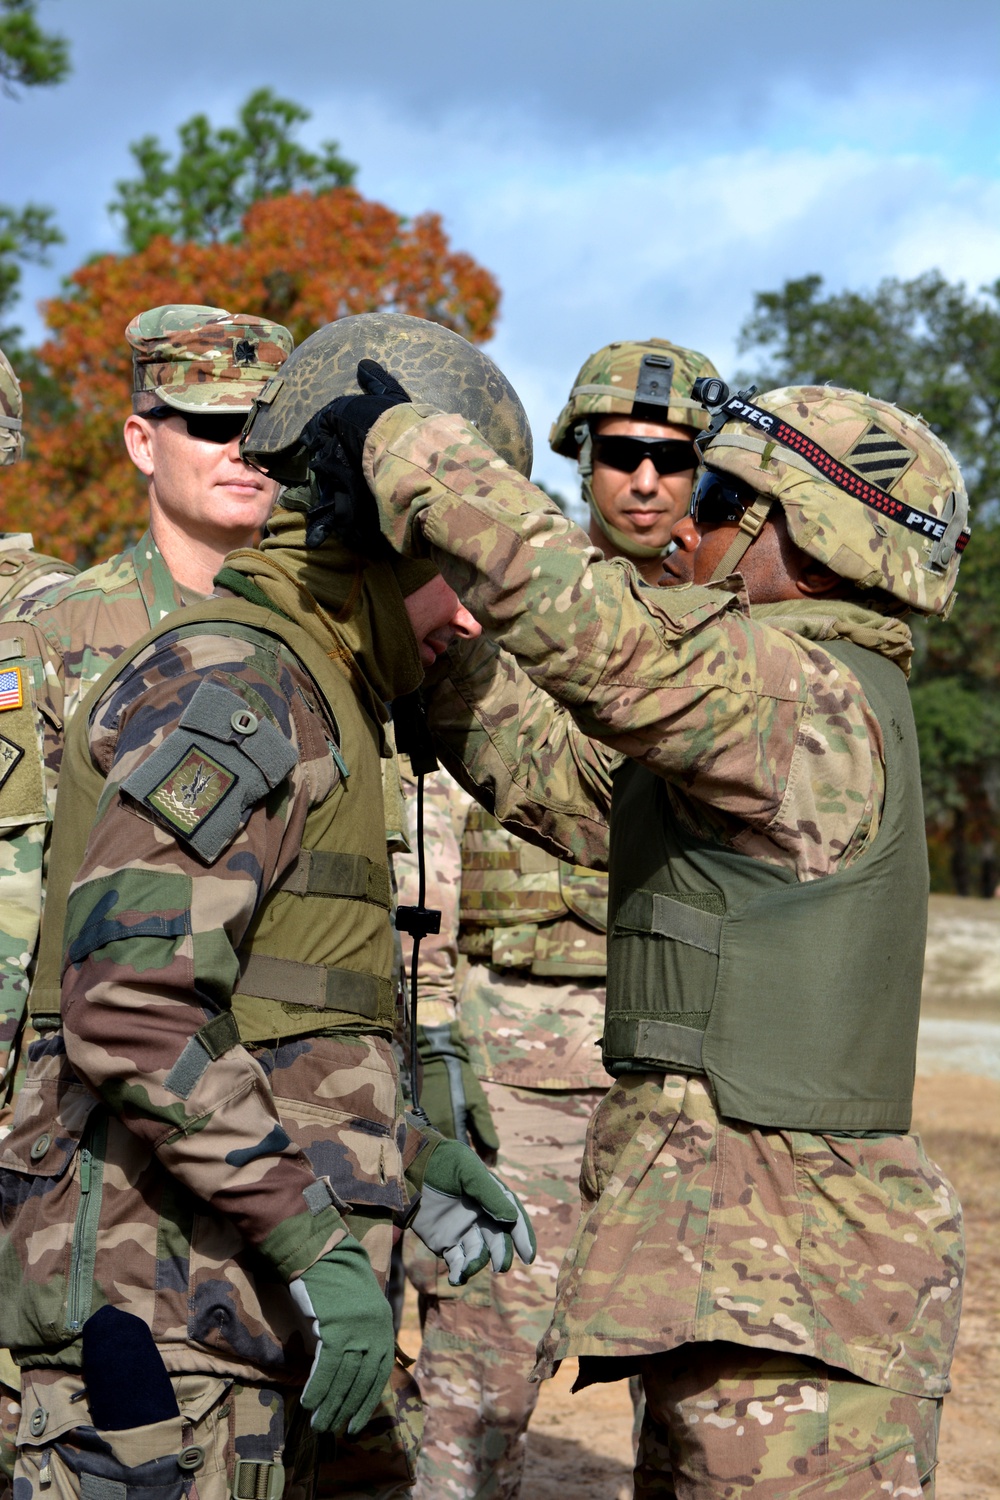 French Army Chief of Staff visits Fort Stewart